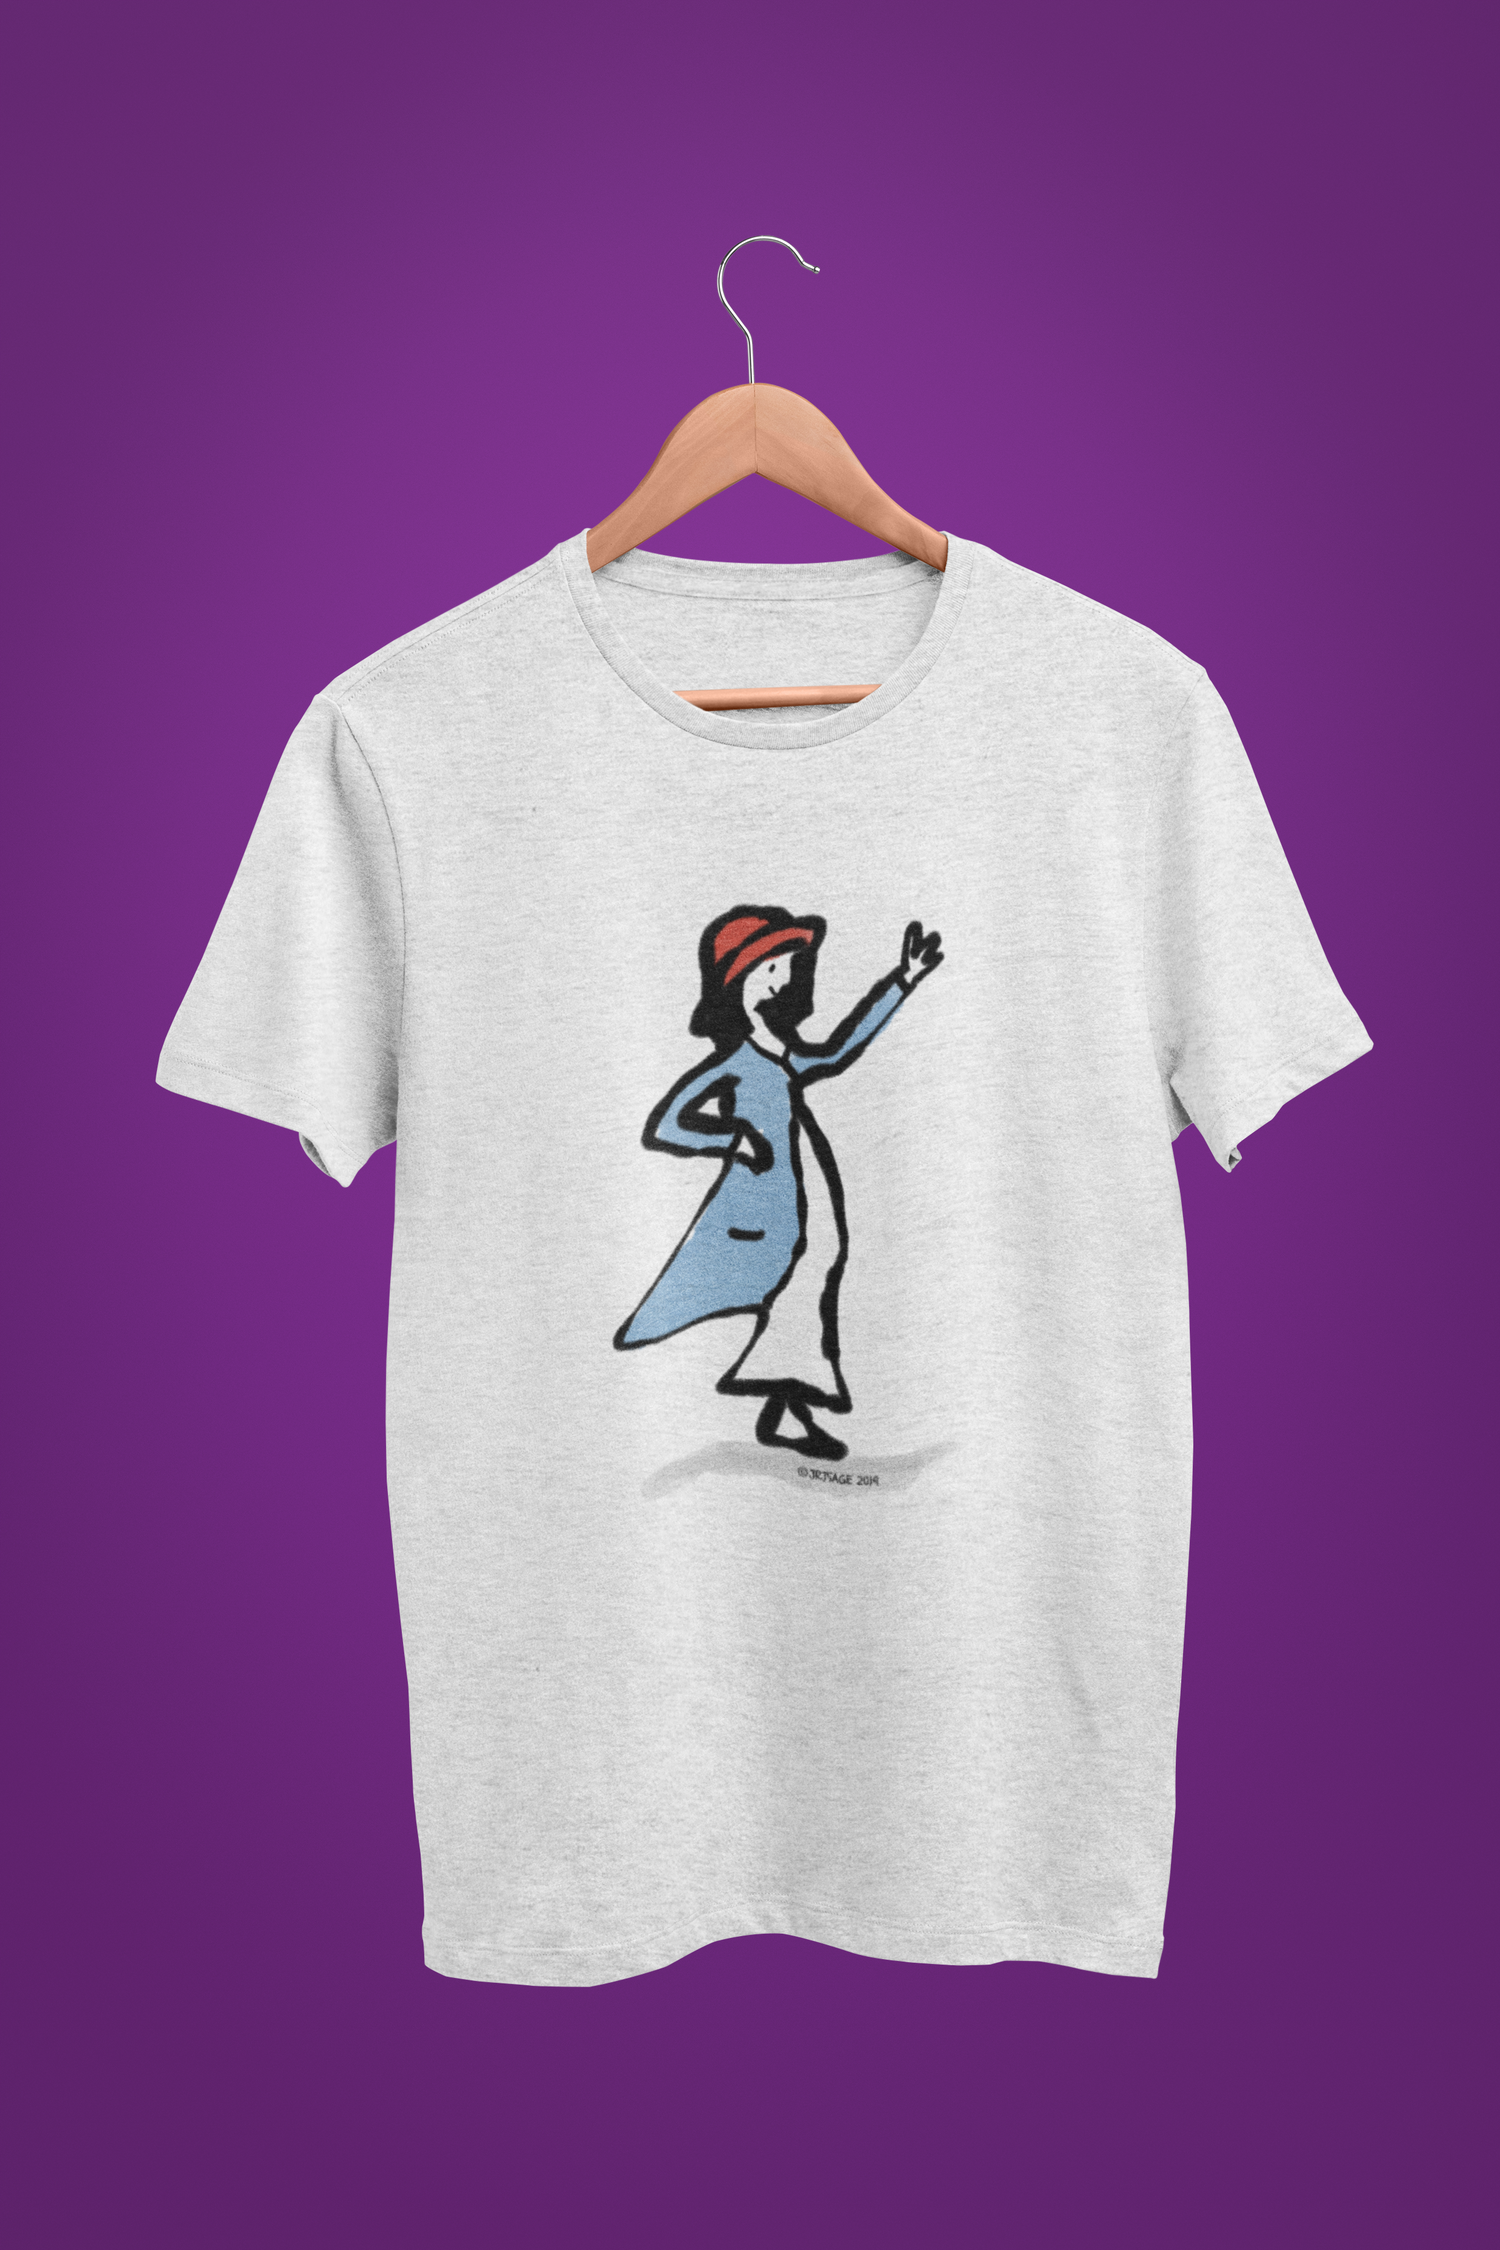 A cream heather grey cotton t-shirt printed with a hand-drawn waving girl design by hector and bone